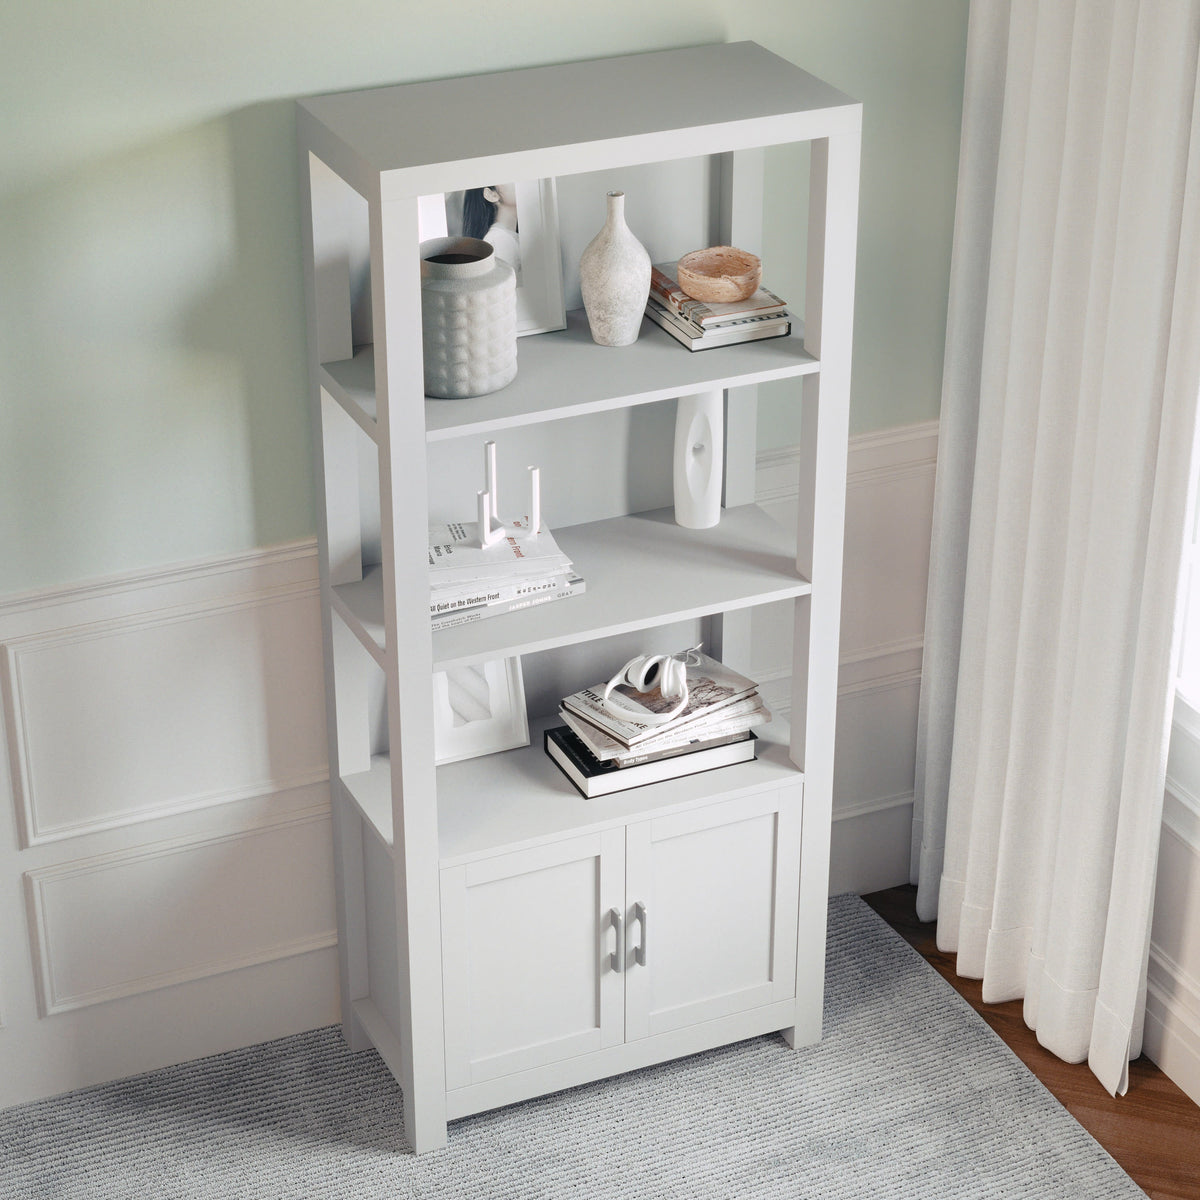 Gray Frame/Brushed Nickel Hardware |#| Gray 4 Tier Shaker Style Bookcase with Cabinet and Brushed Nickel Hardware